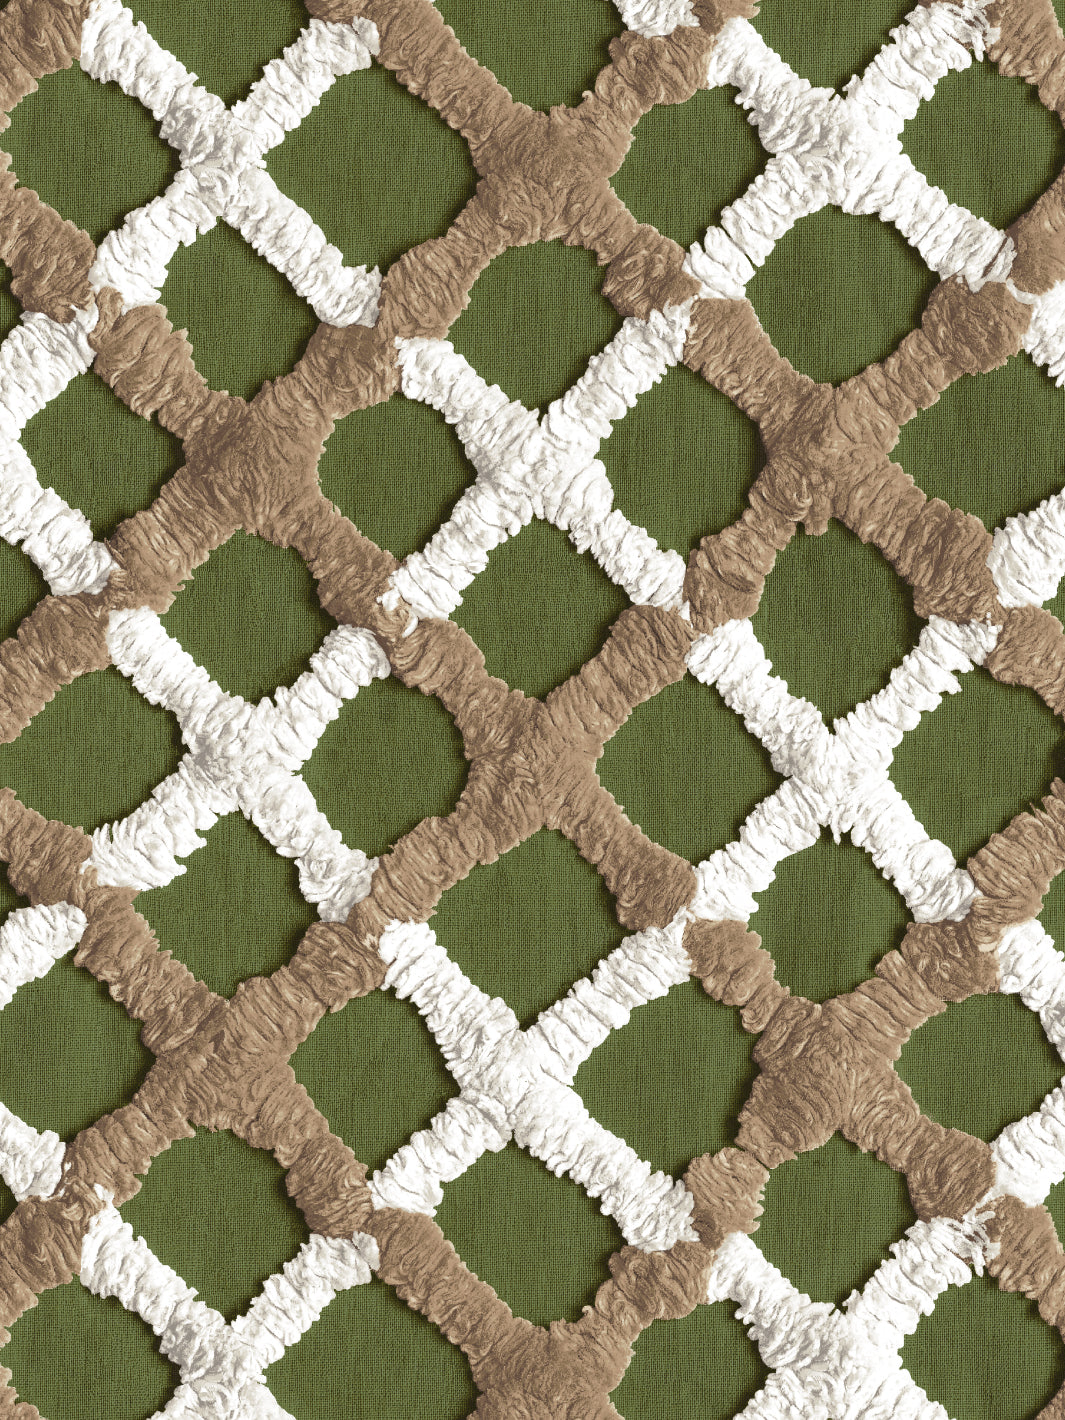 'Chenille Quilt' Wallpaper by Chris Benz - Olive